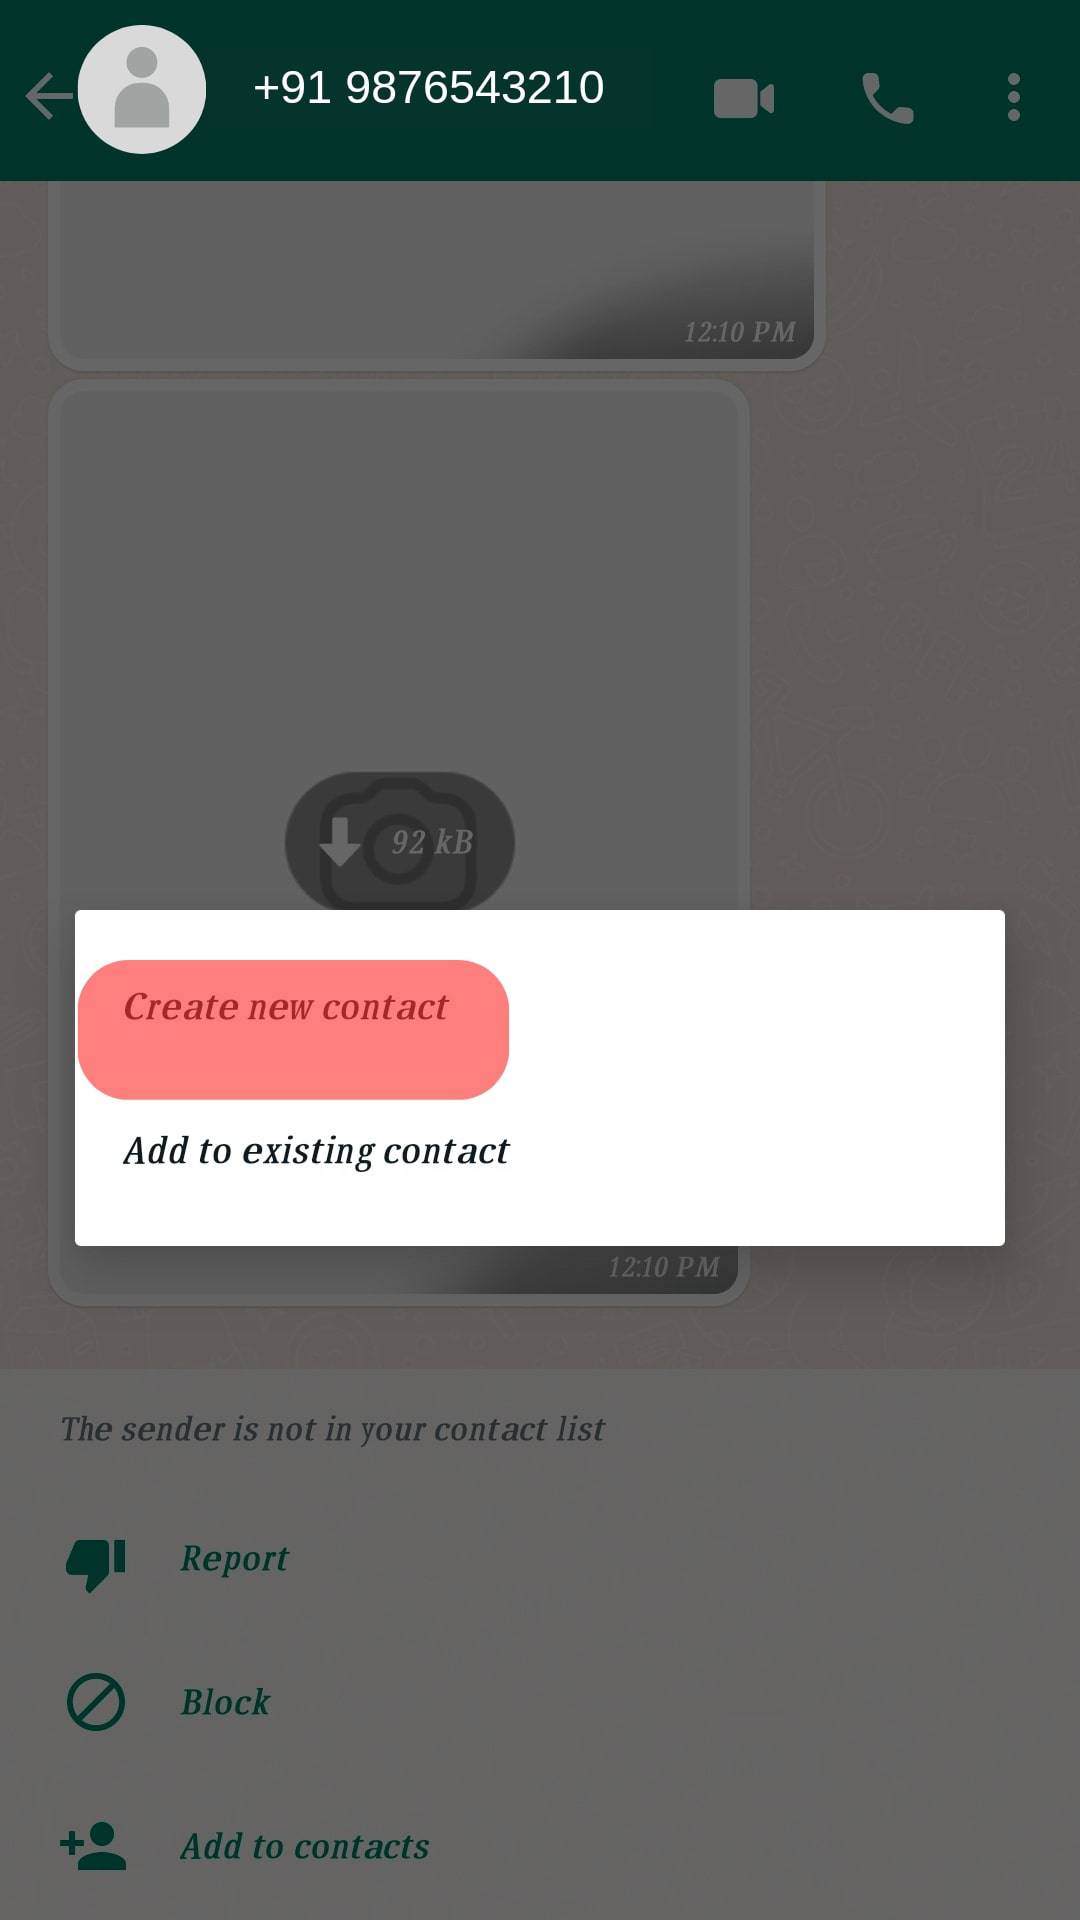 New Contact Or An Existing Contact.